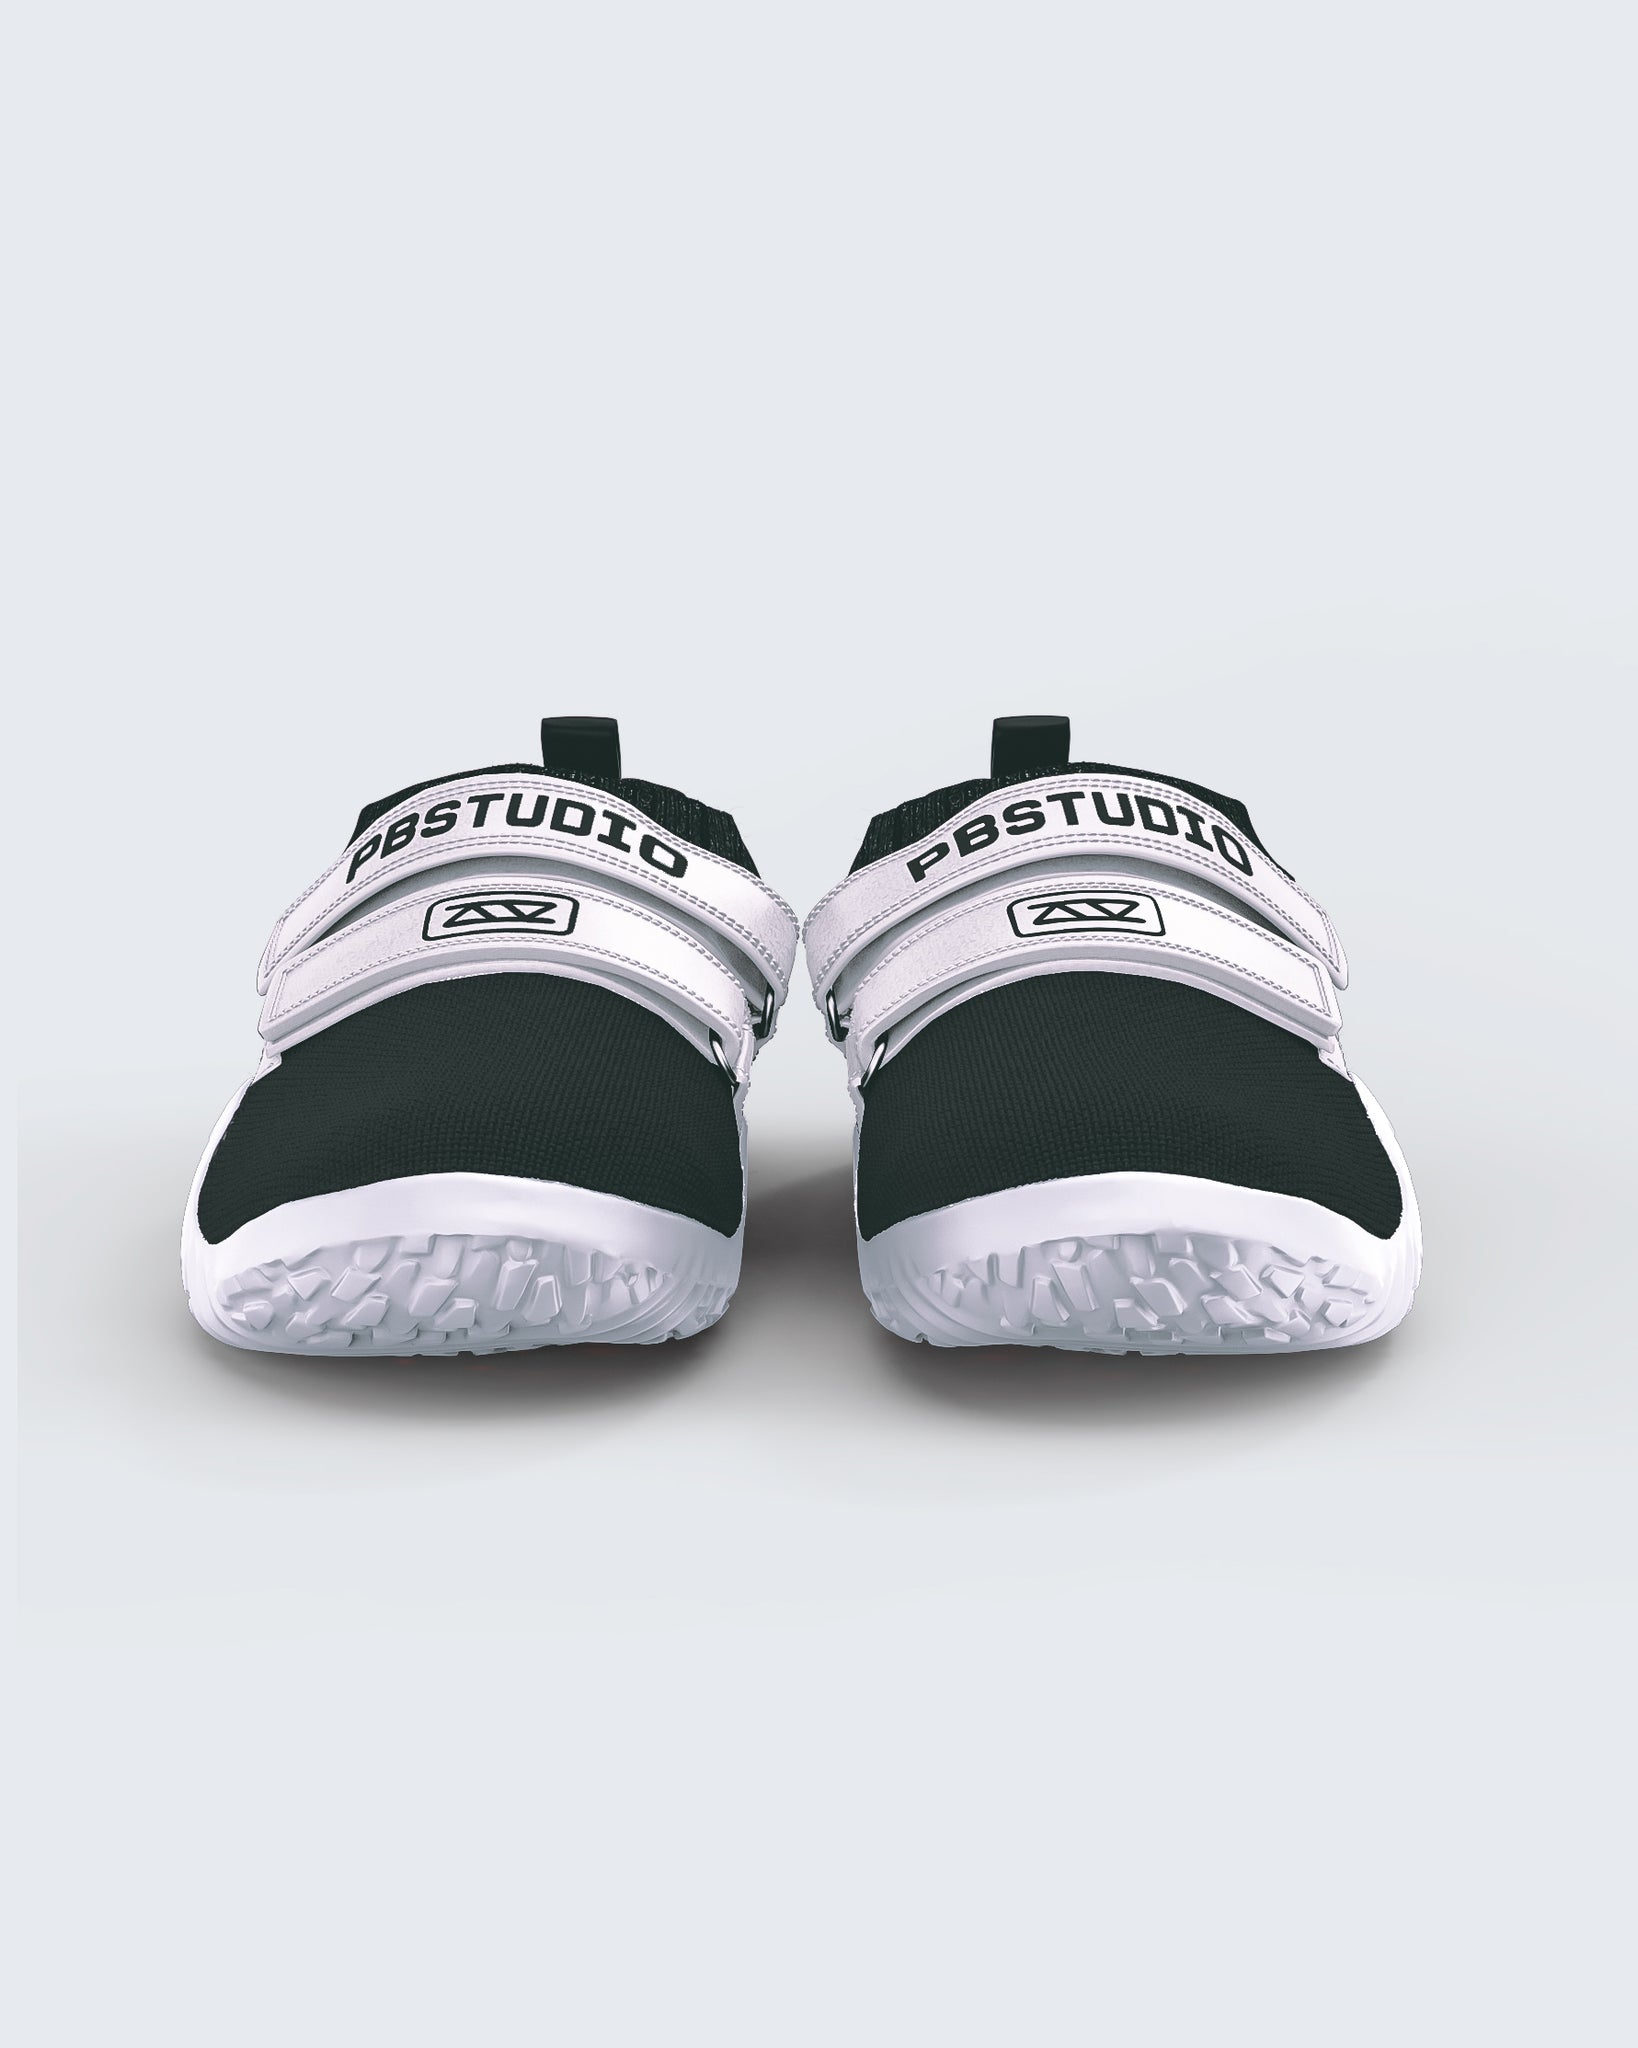 Pro Slippers - Black and White